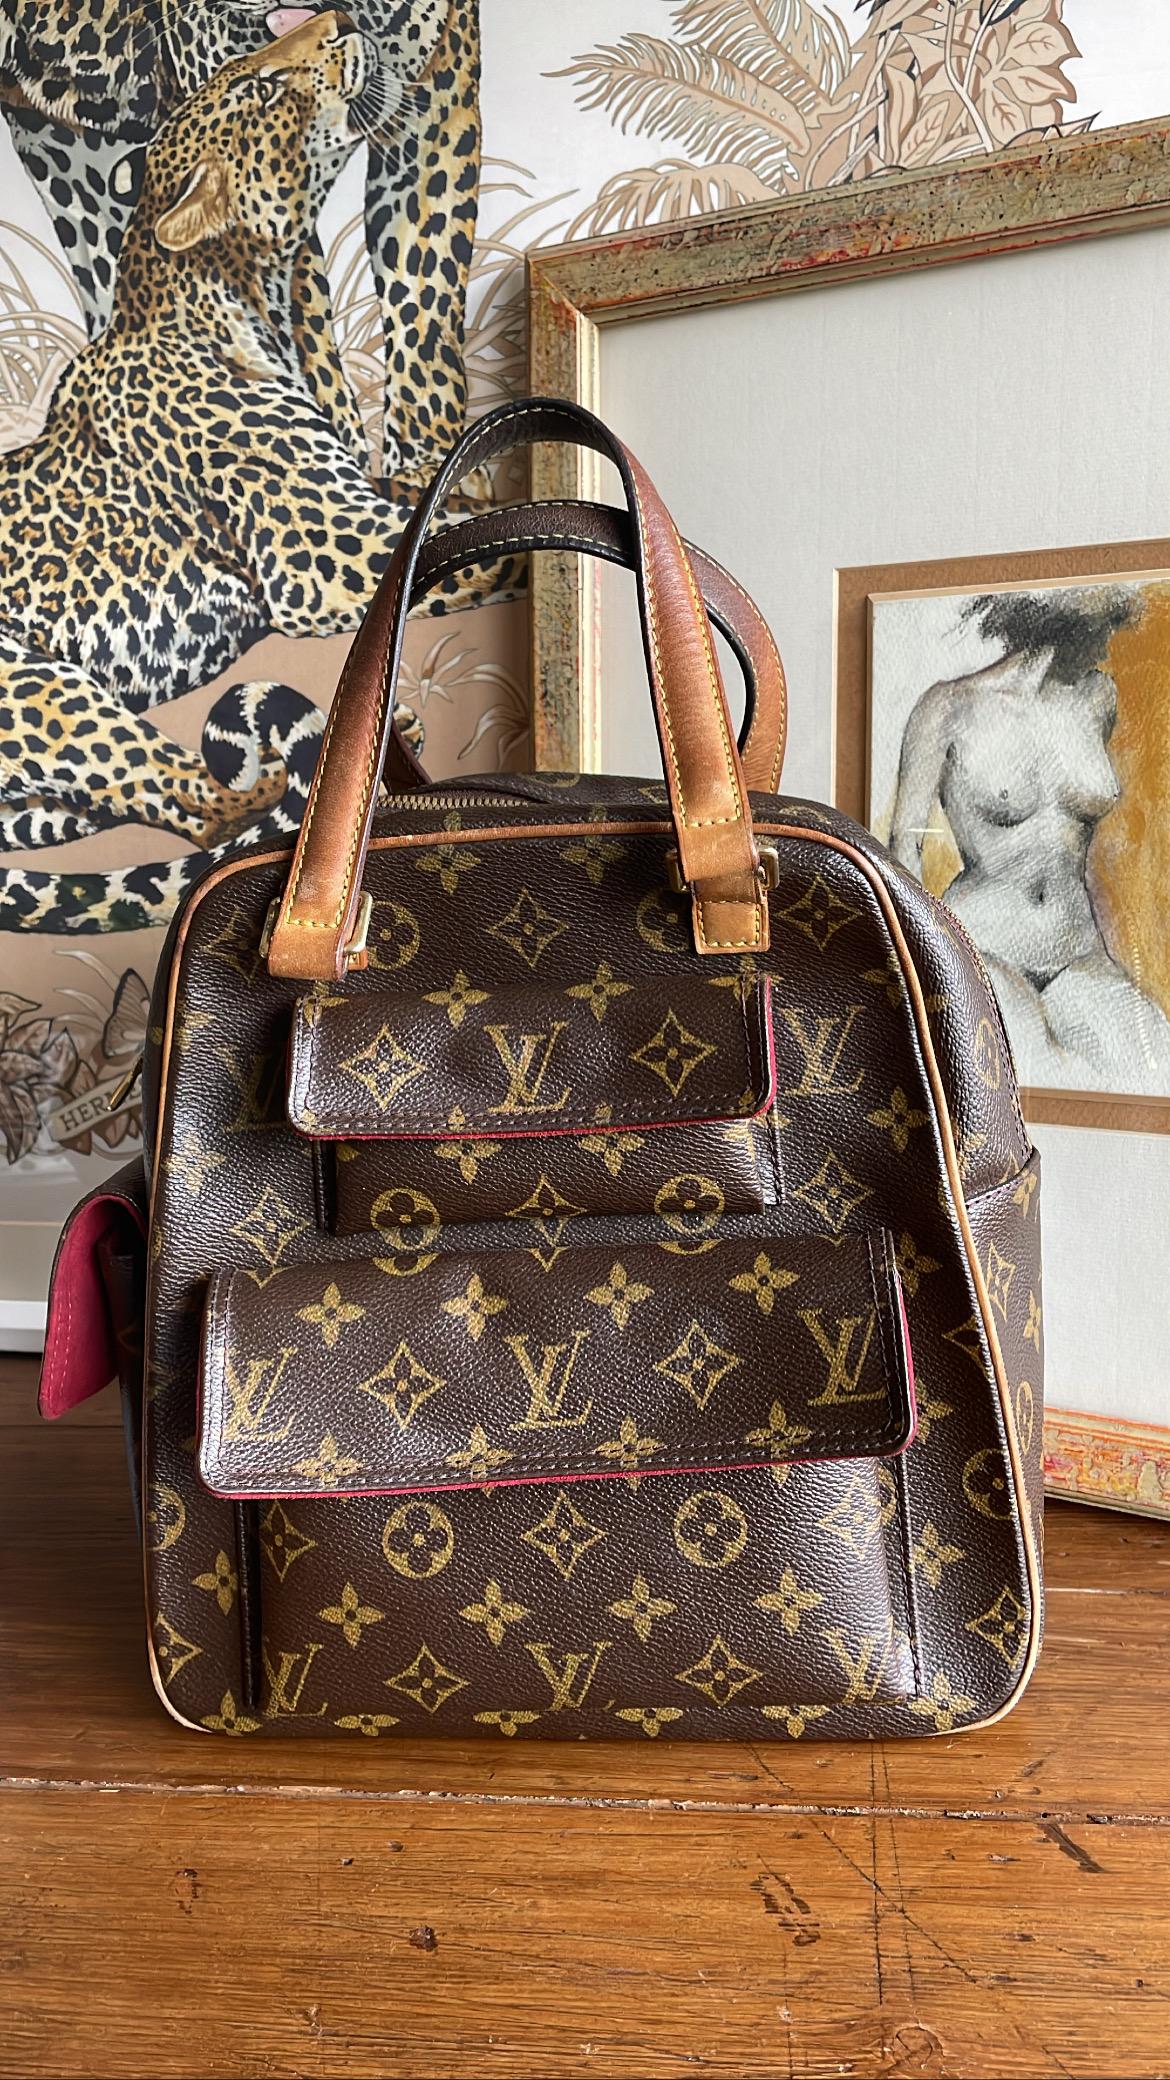 Louis Vuitton Excentric Citè Limited Edition bag. Capacious and versatile model with different pockets available. Red lined interior and zip closure.
In excellent condition it has only a few signs of use mainly on the handles as can be seen from the